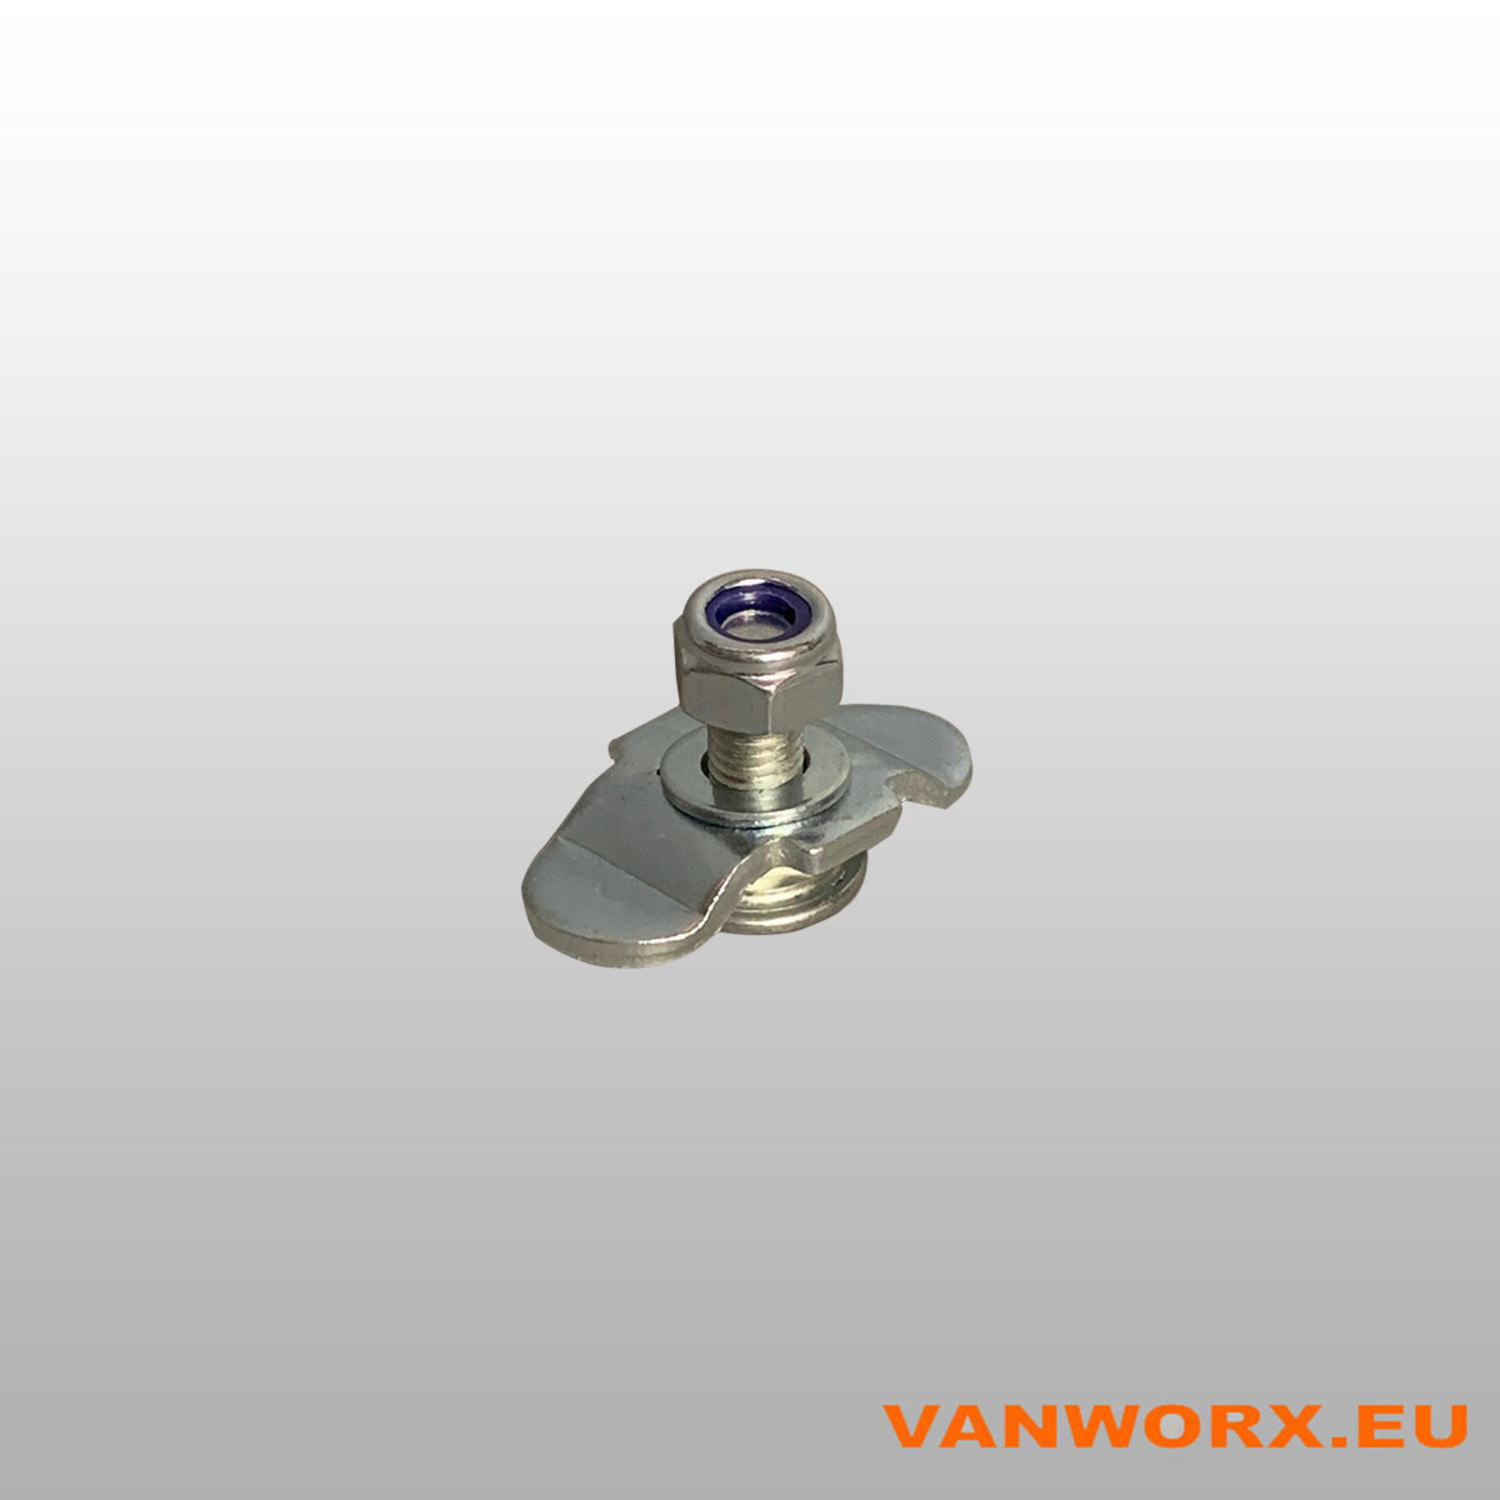 KERL Screw fitting for airline rails M8